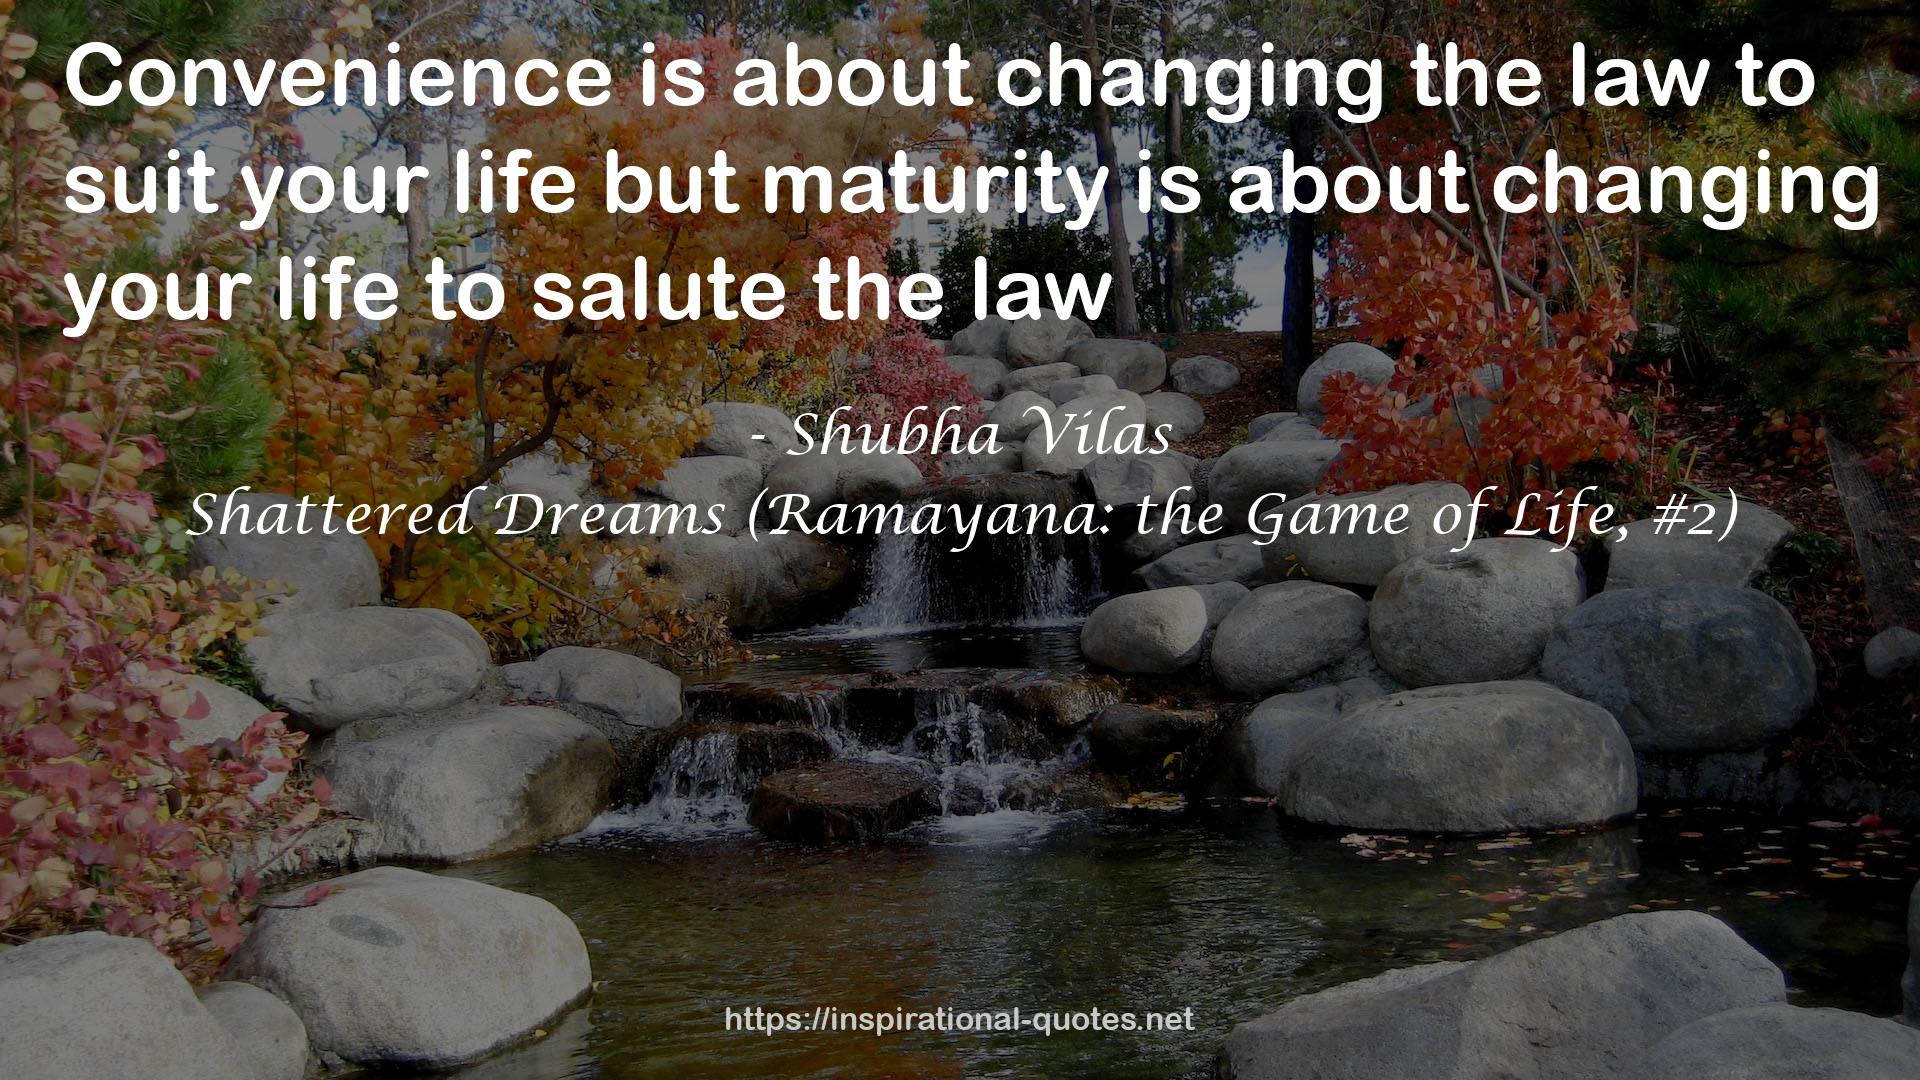 Shattered Dreams (Ramayana: the Game of Life, #2) QUOTES